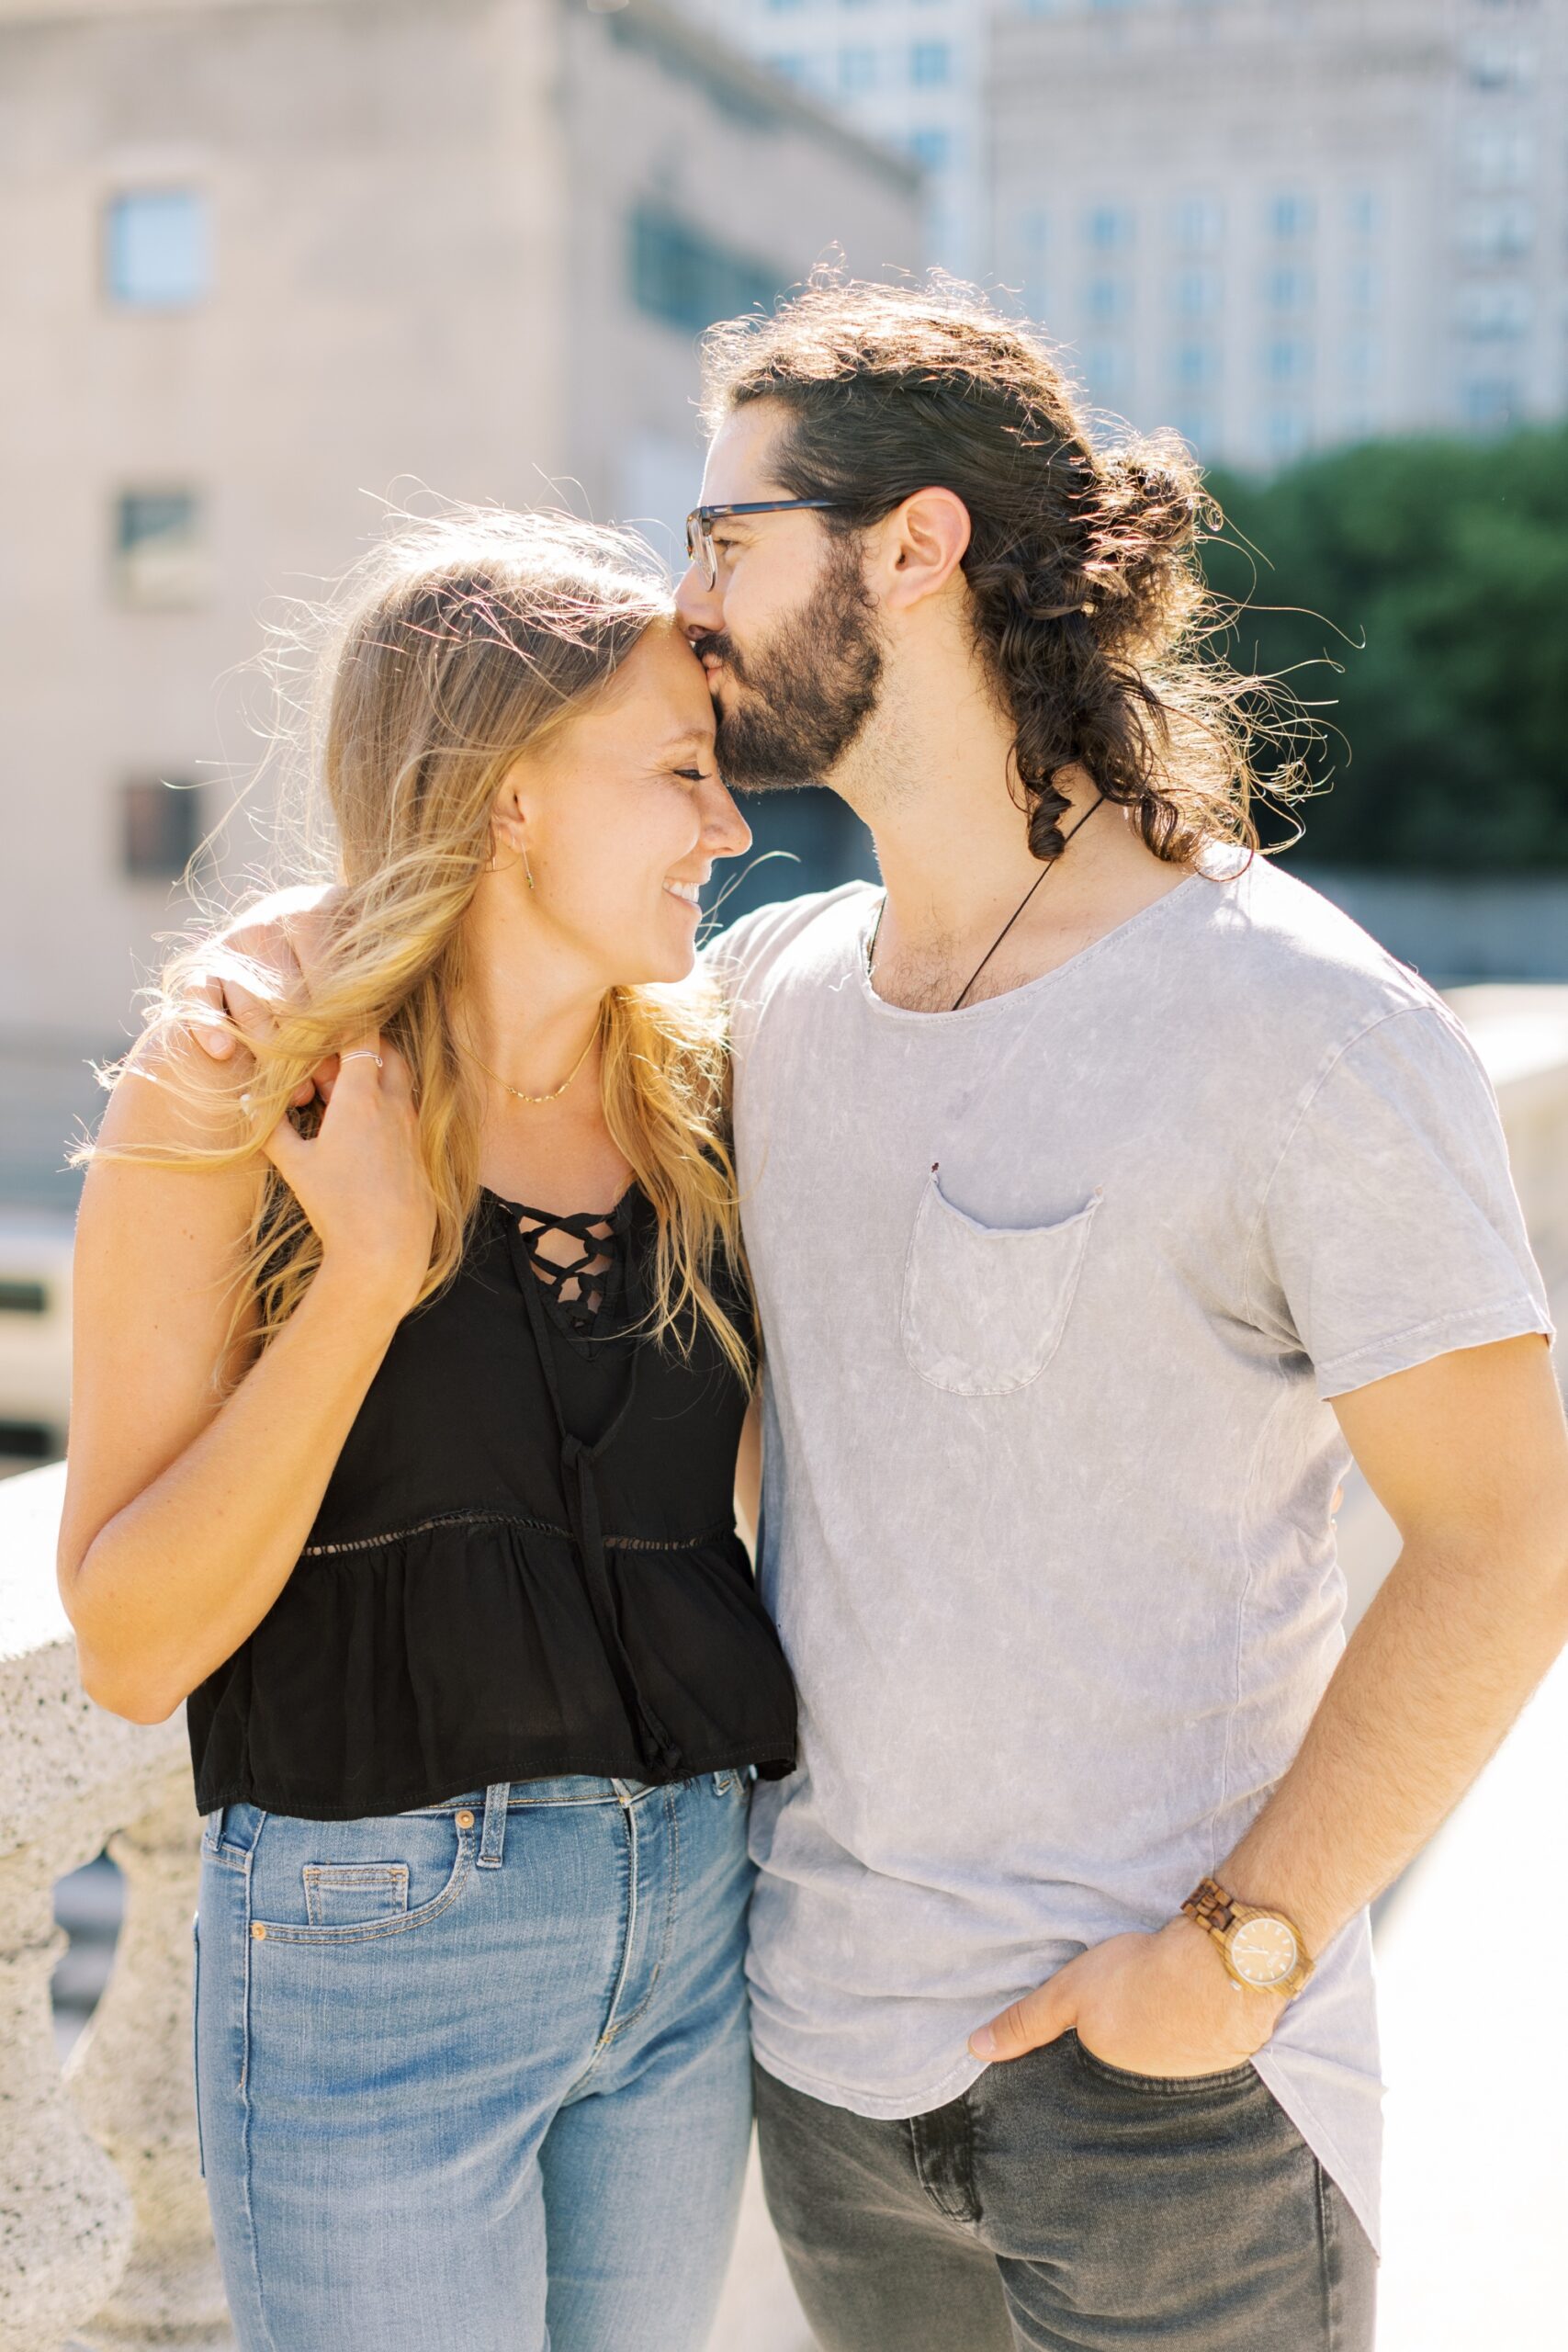 Man kisses woman's forehead during summer Chicago engagement photoshoot